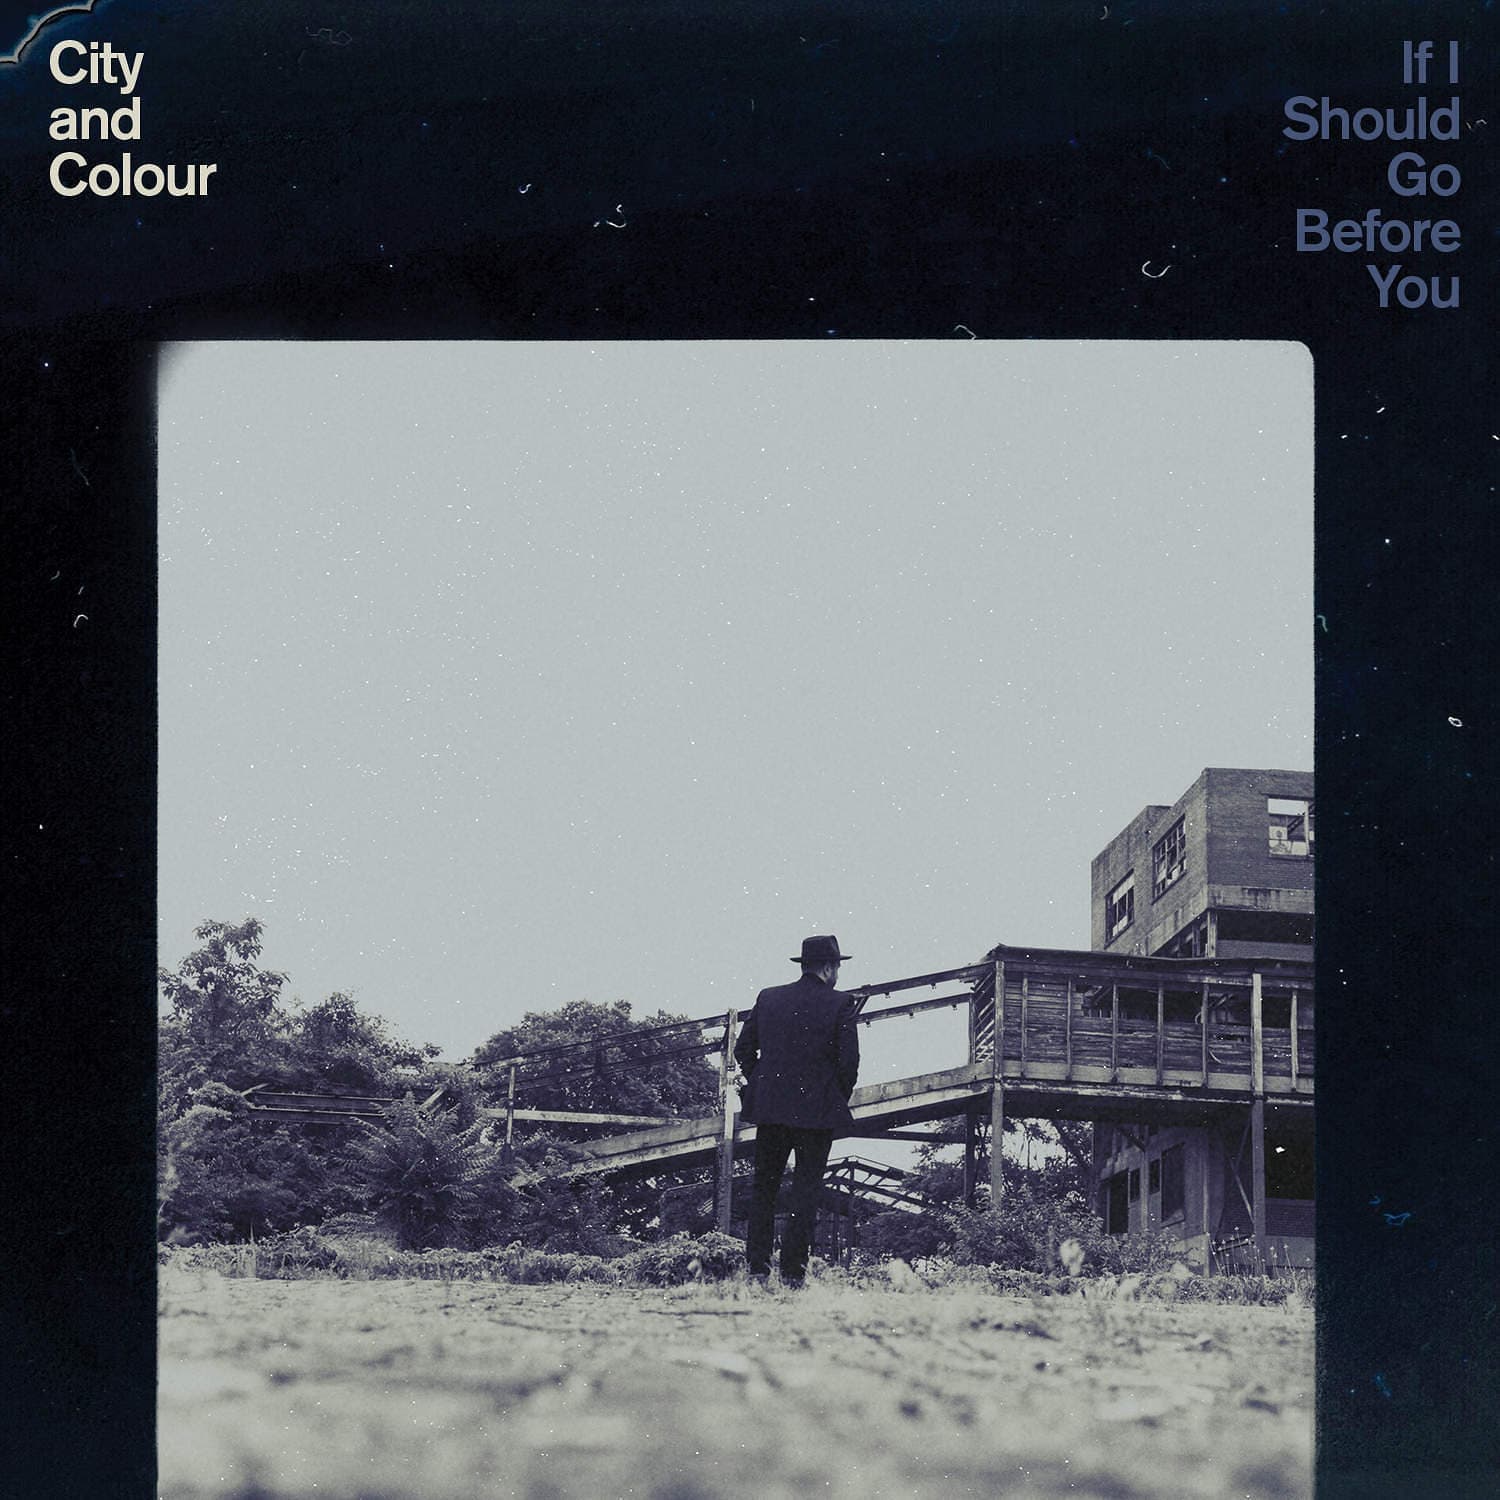 Album Review: If I Should Go Before You by City and Colour